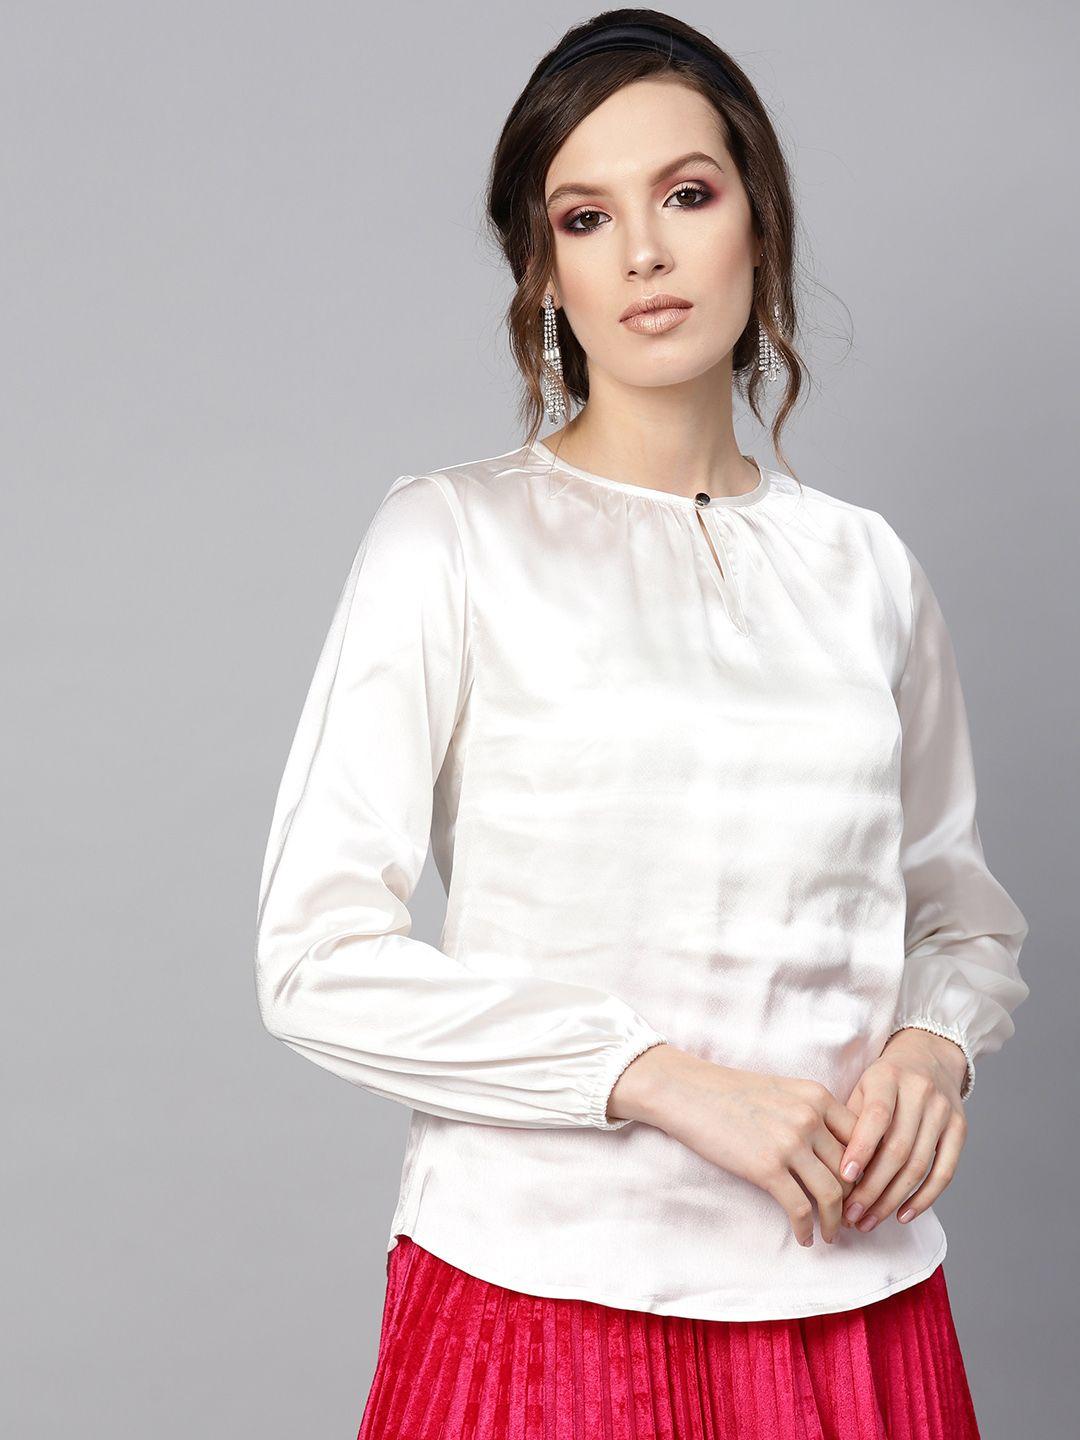 sassafras-women-off-white-solid-top-with-satin-finish